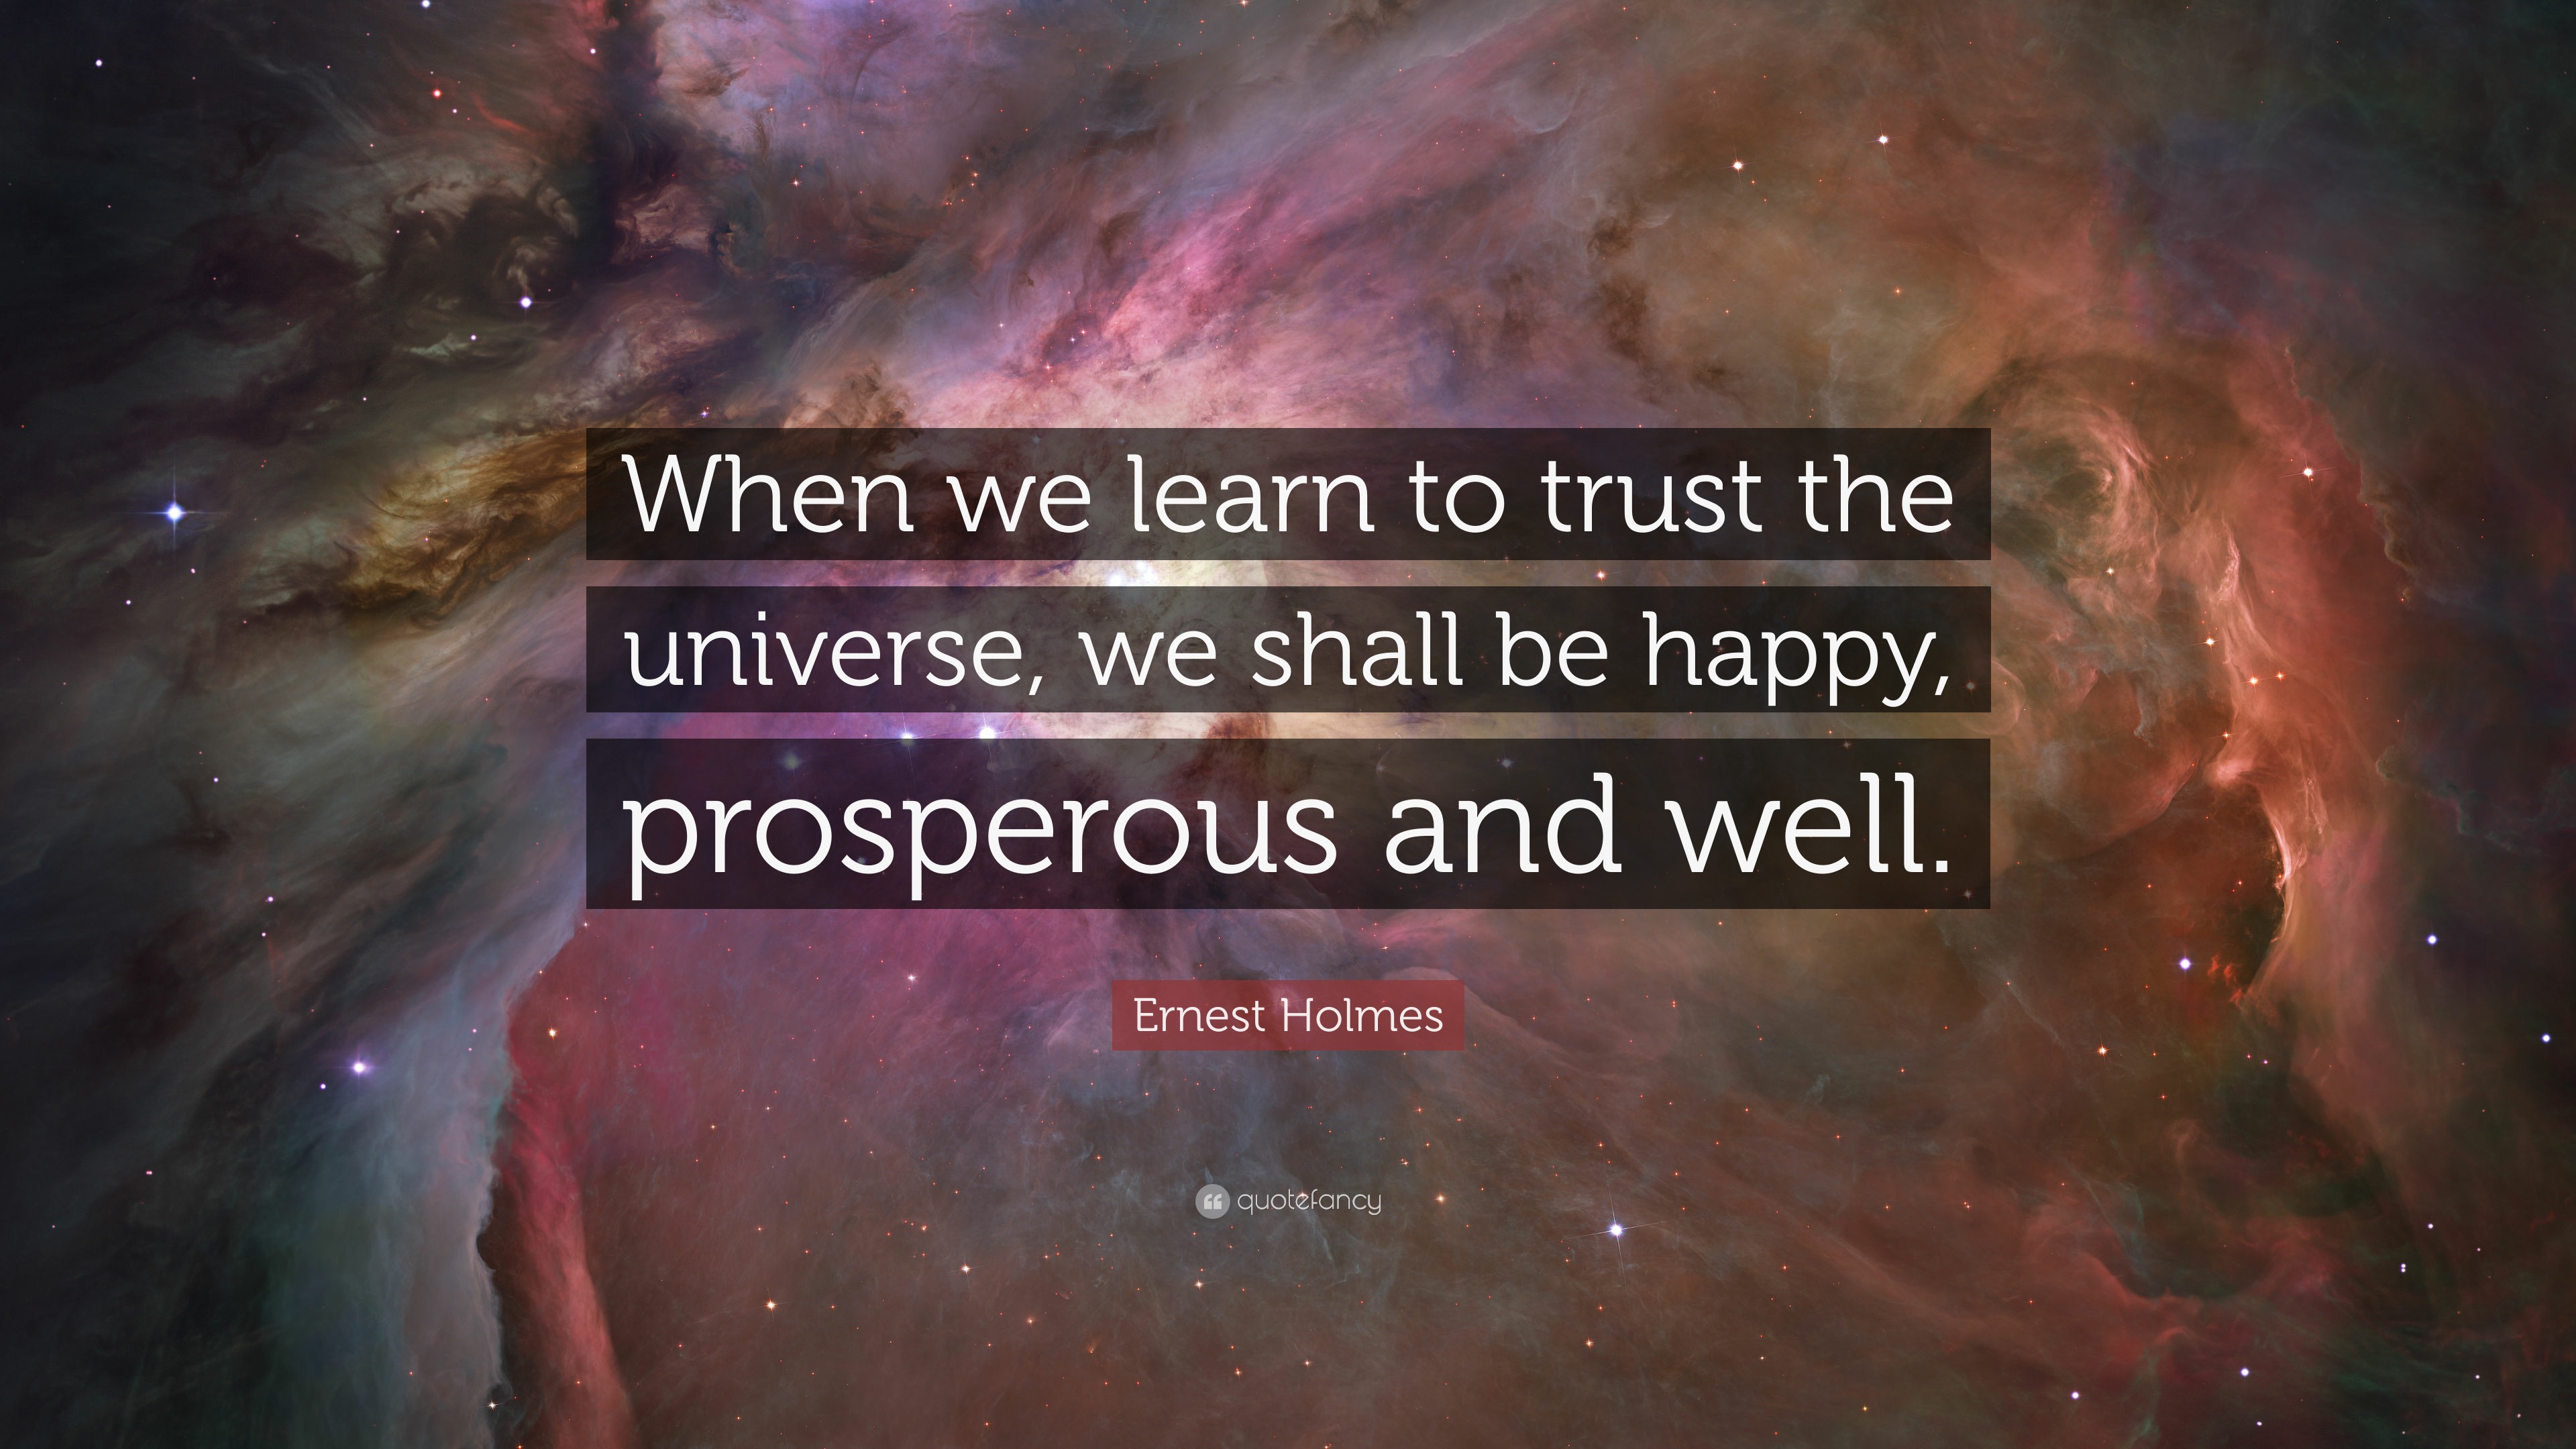 Ernest Holmes Quote: “When we learn to trust the universe, we shall be  happy, prosperous and